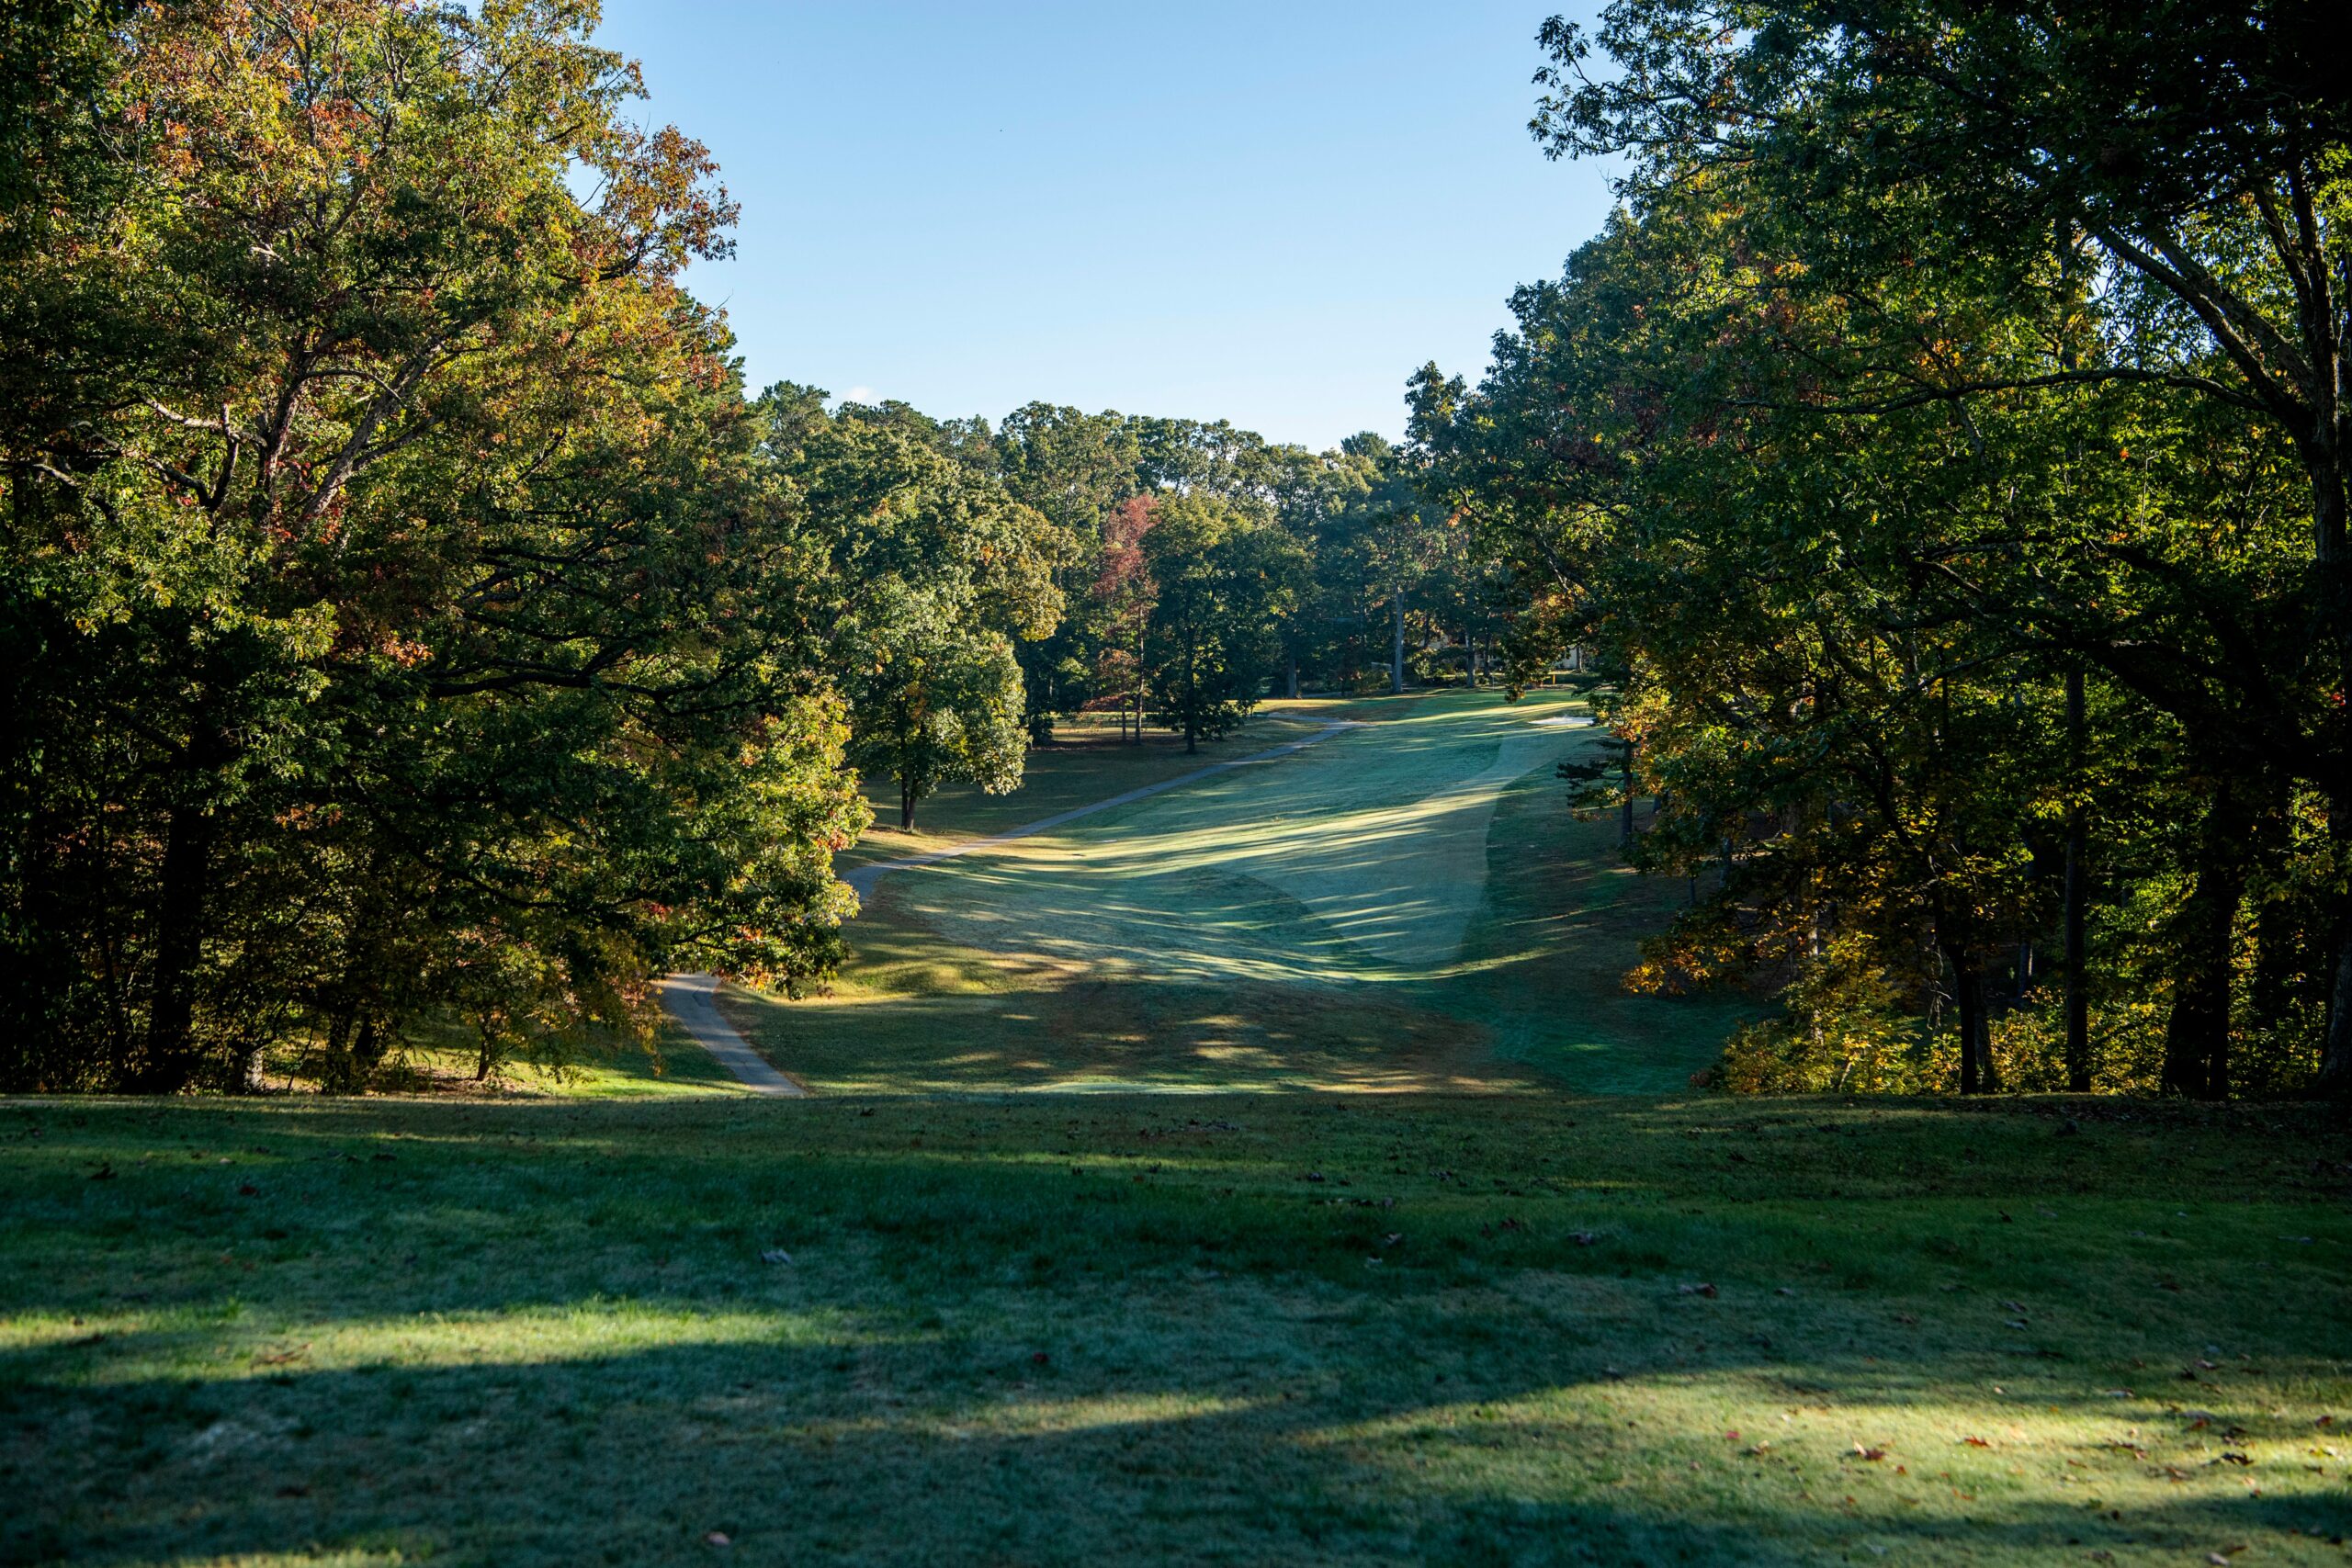 In pictures: See how this Donald Ross-designed municipal golf course has come back to life in North Carolina